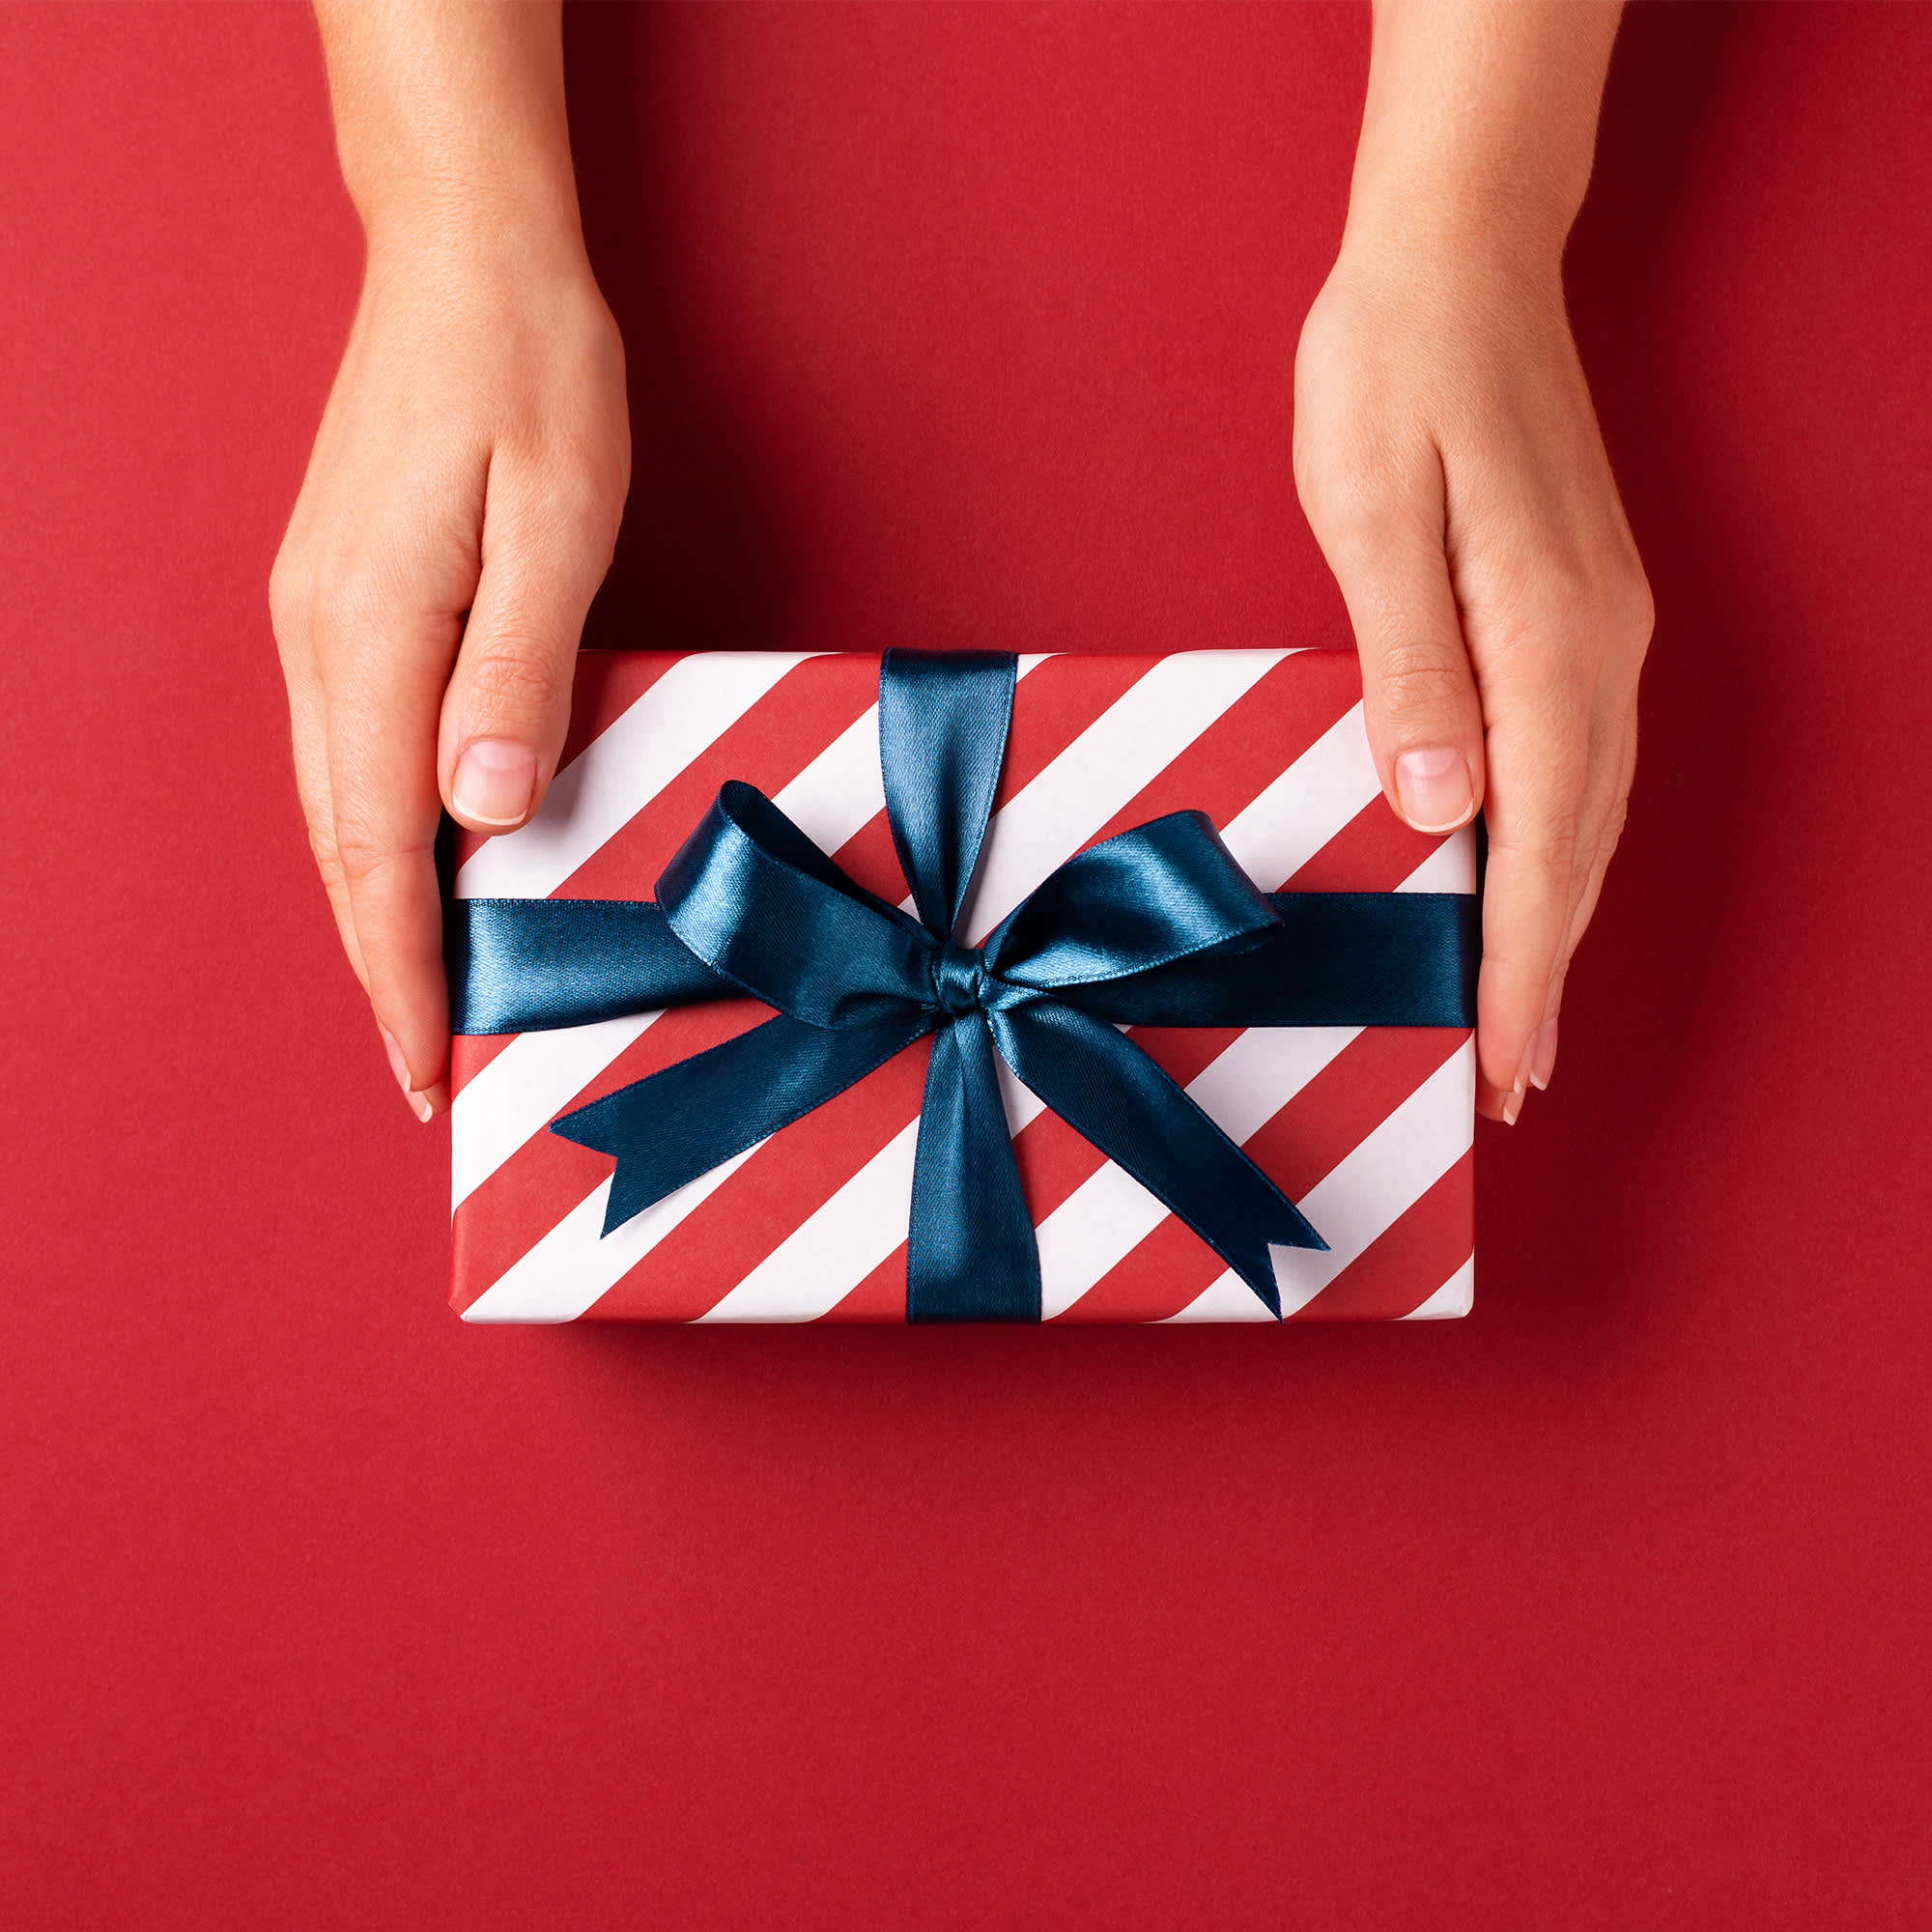 Don't miss the opportunity to grab the perfect gift! Give that special someone the chance to enjoy a unique experience in Madrid with this gift card.